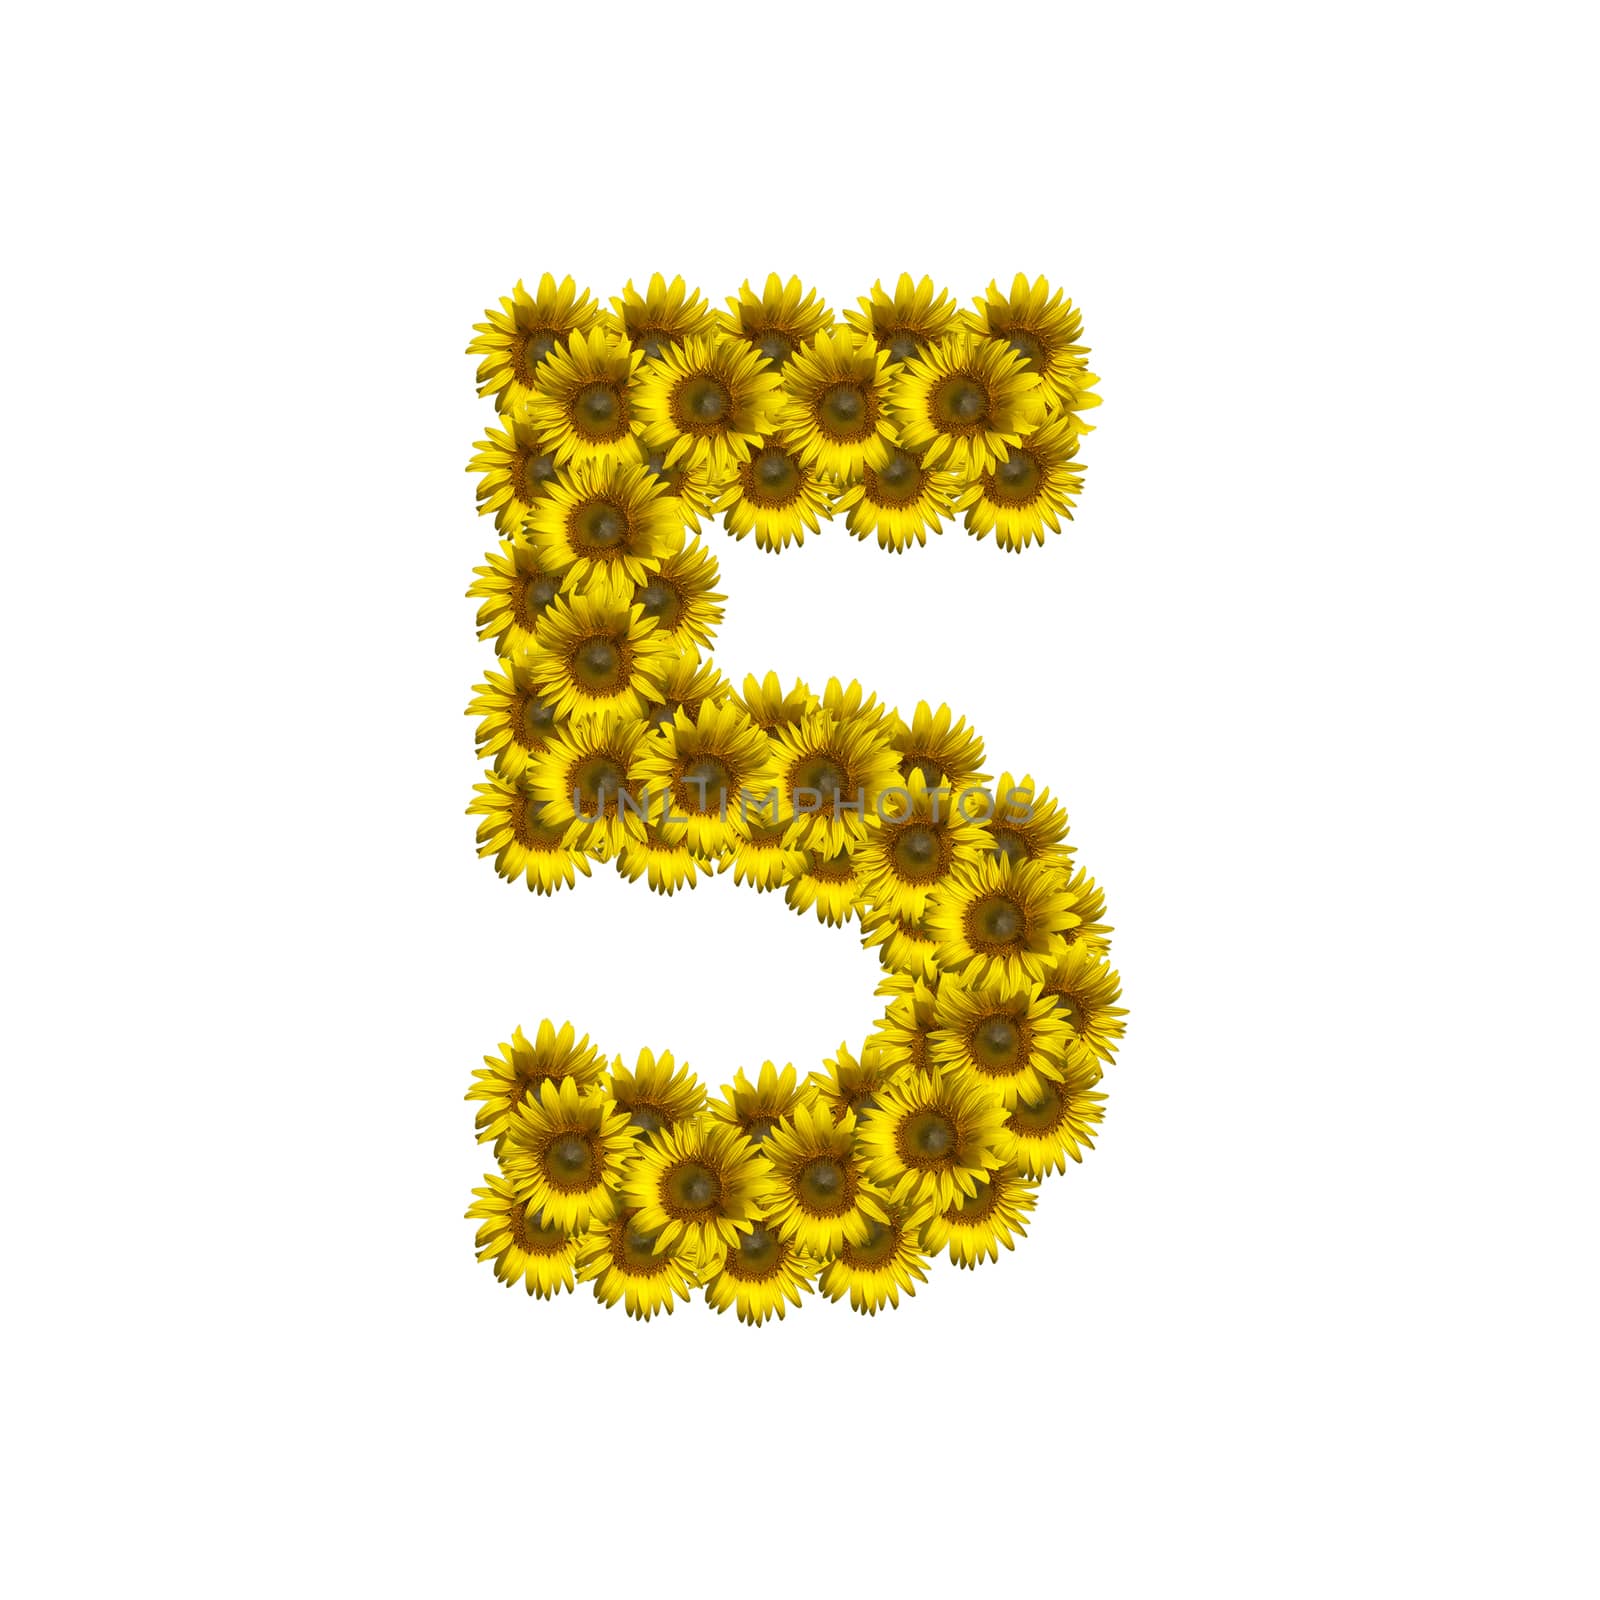 Sunflower number isolated on white background, number 5